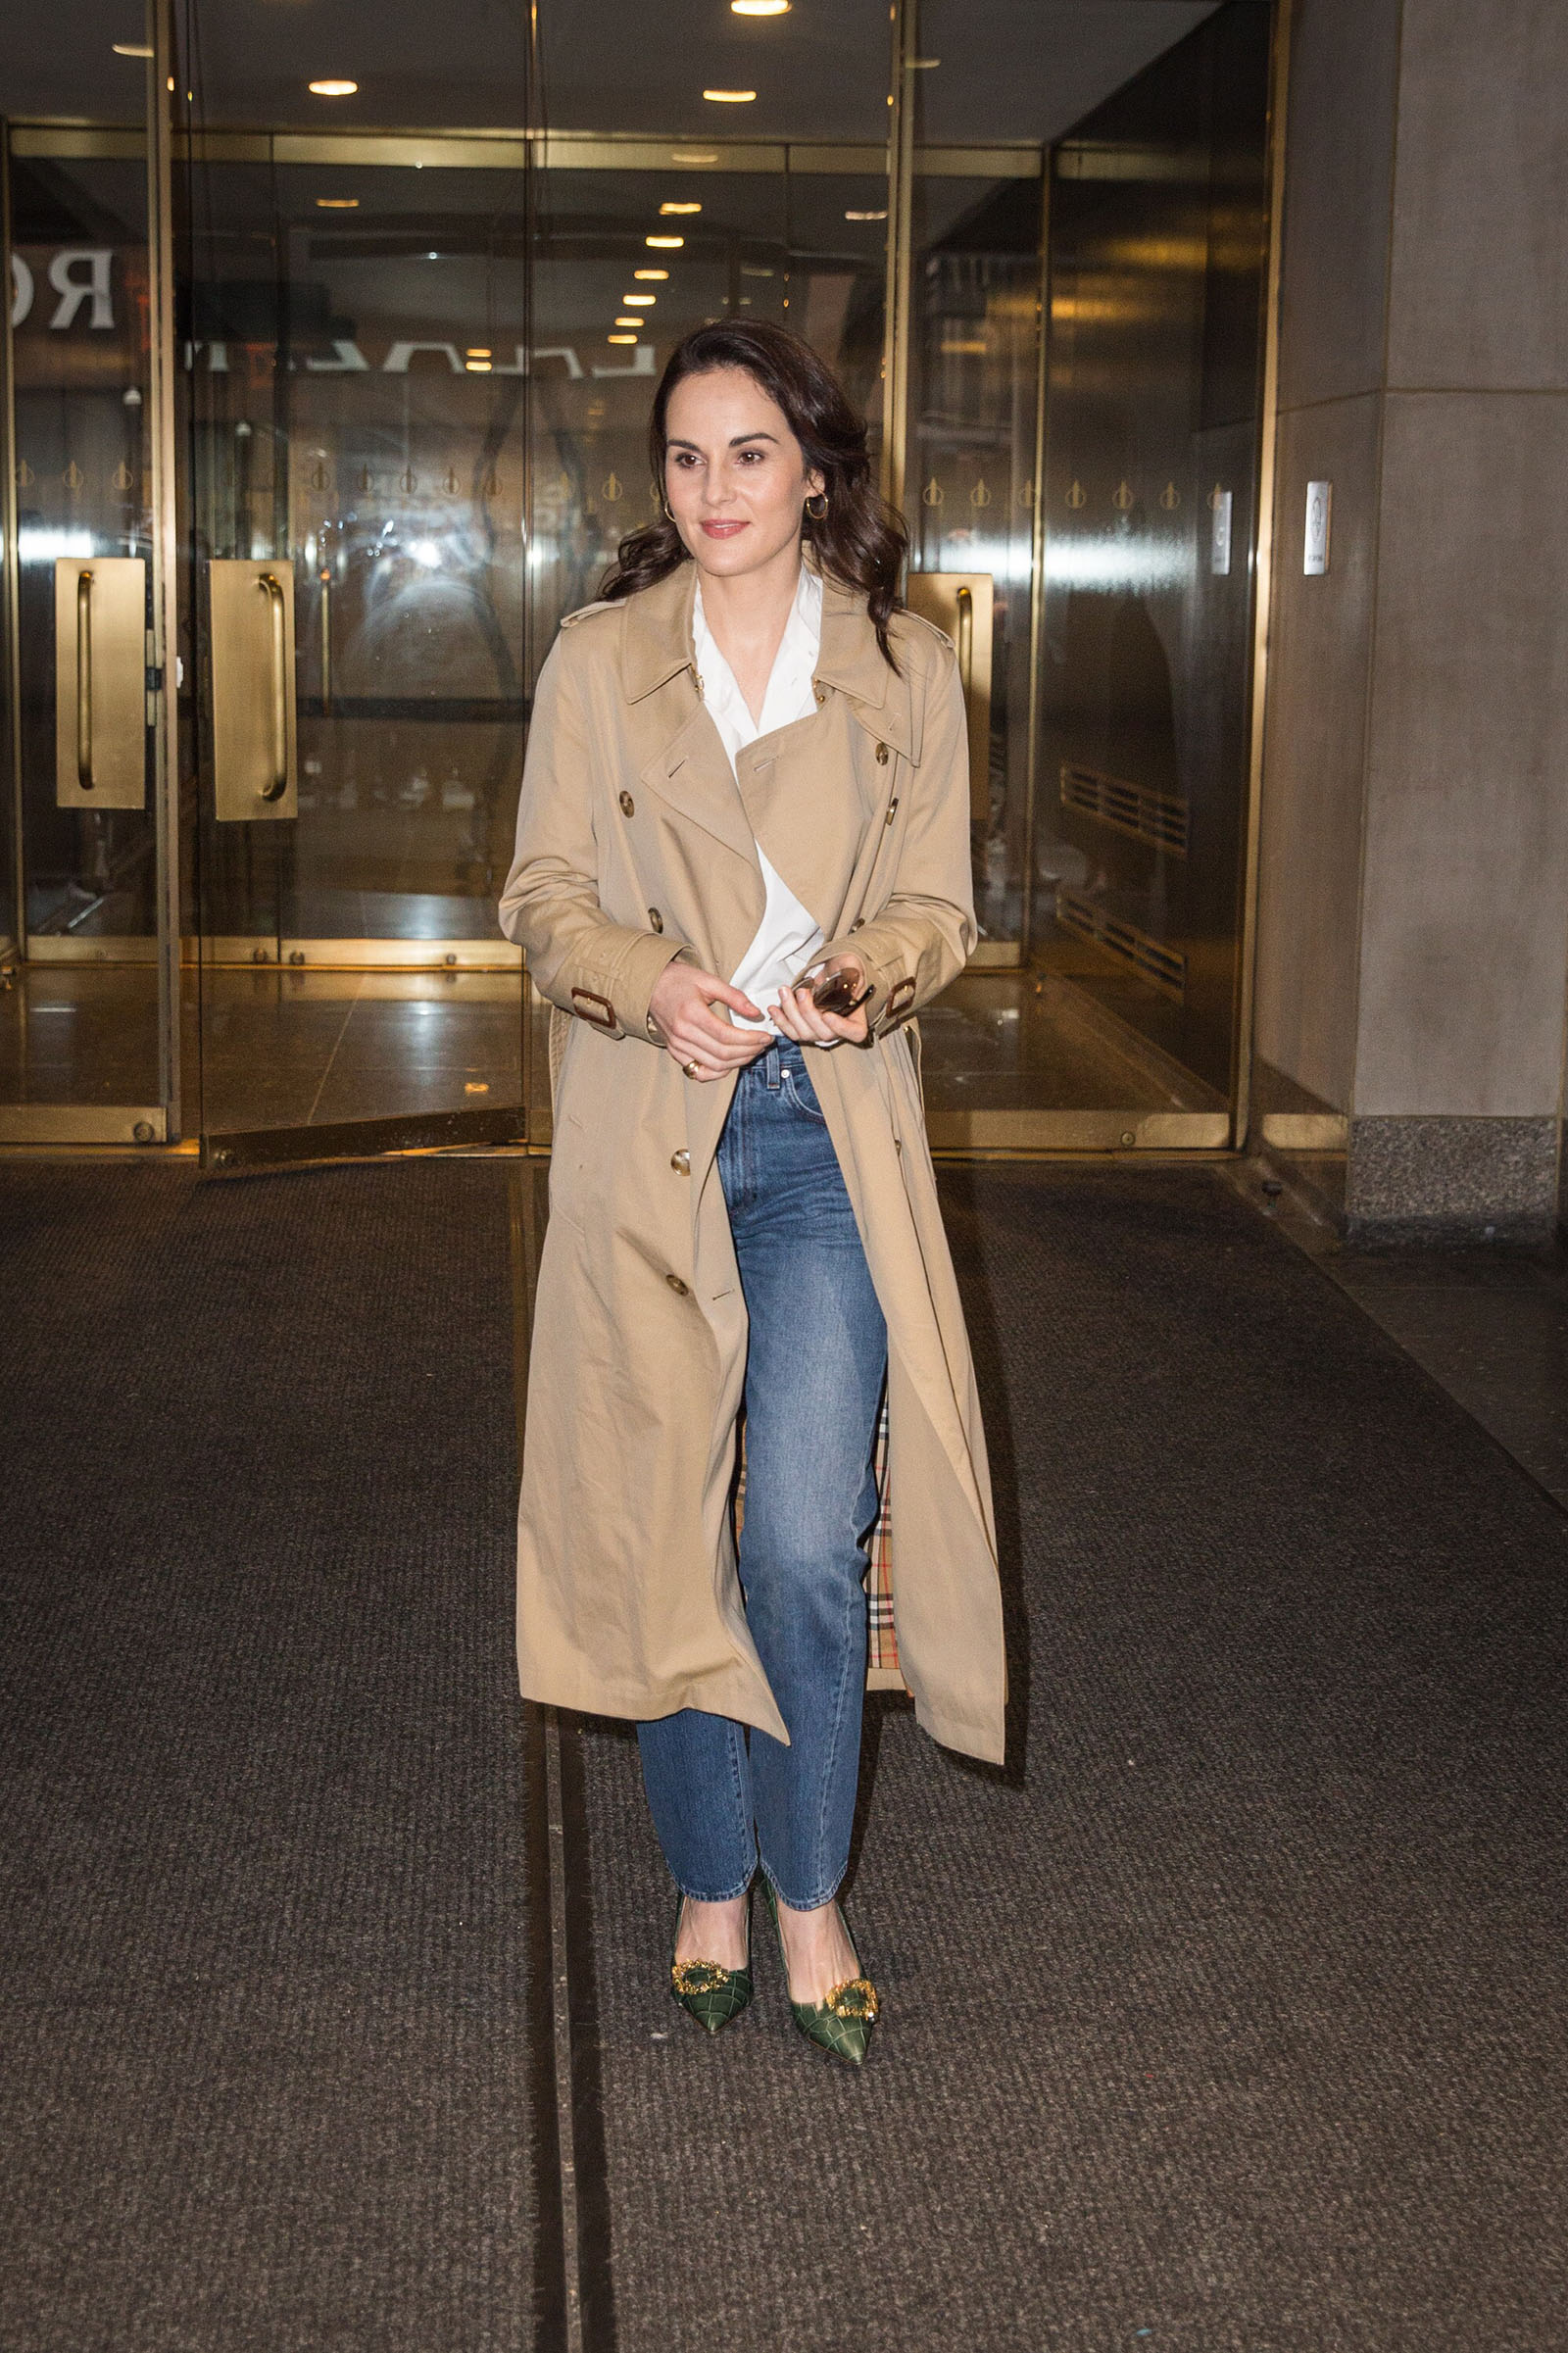 Michelle Dockery looks classic and chic in a trench coat, jeans, and green flats!